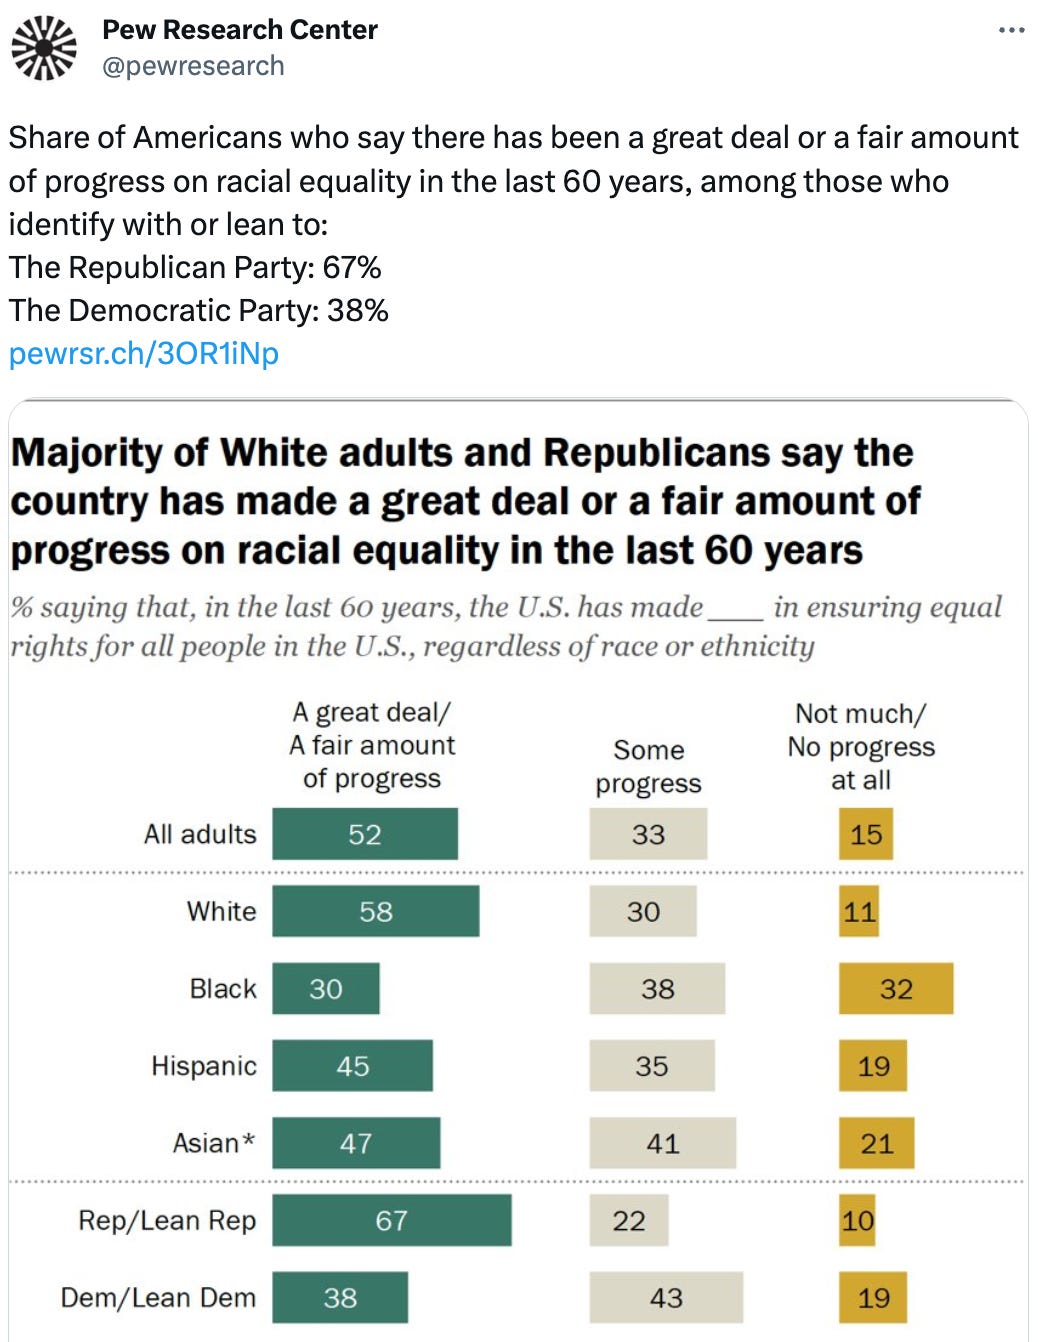  See new Tweets Conversation Pew Research Center @pewresearch Share of Americans who say there has been a great deal or a fair amount of progress on racial equality in the last 60 years, among those who identify with or lean to: The Republican Party: 67% The Democratic Party: 38% https://pewrsr.ch/3OR1iNp